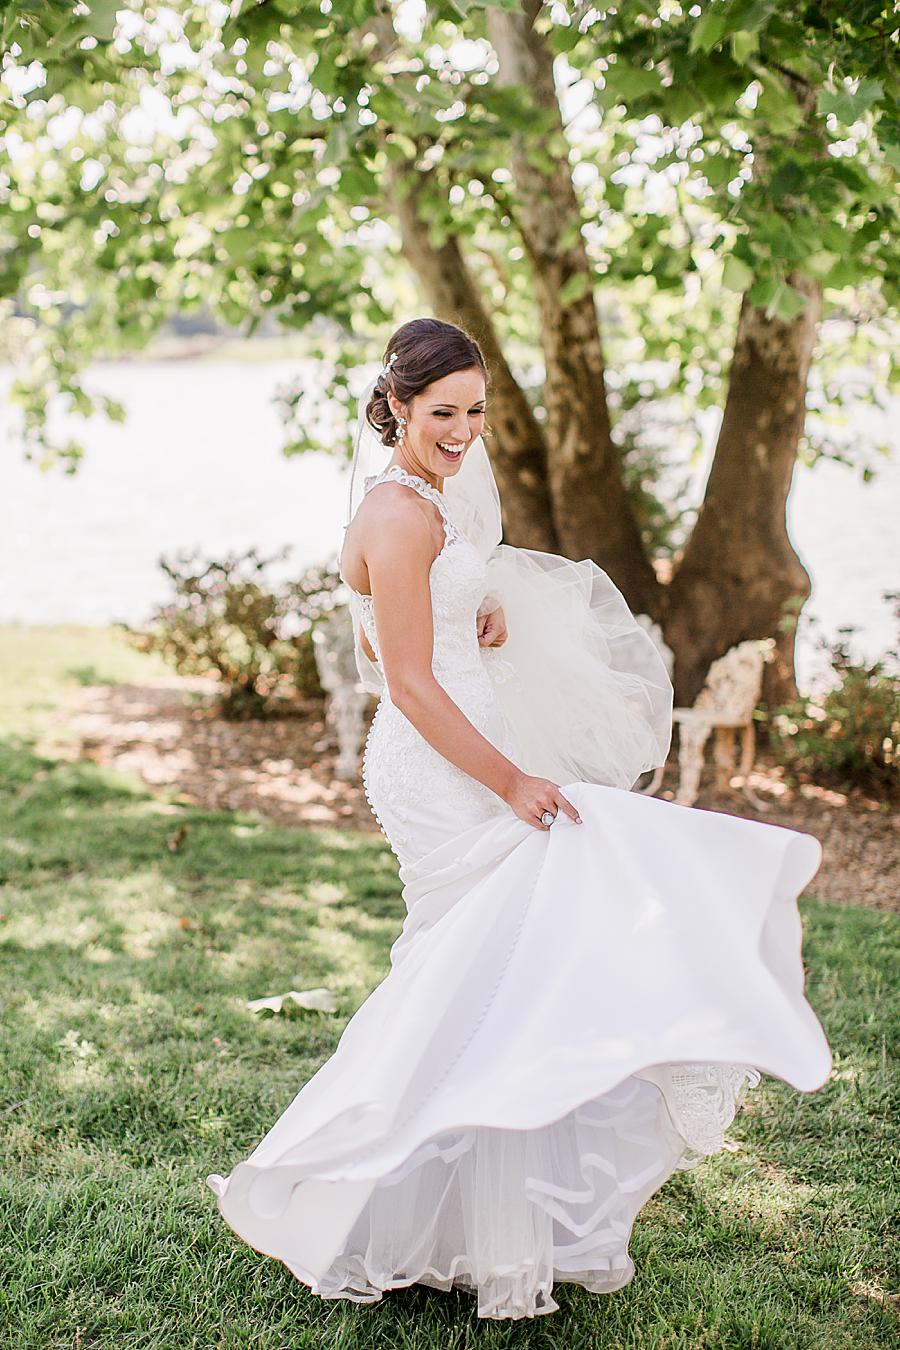 Twirling wedding dress at this pavilion wedding by Knoxville Wedding Photographer, Amanda May Photos.